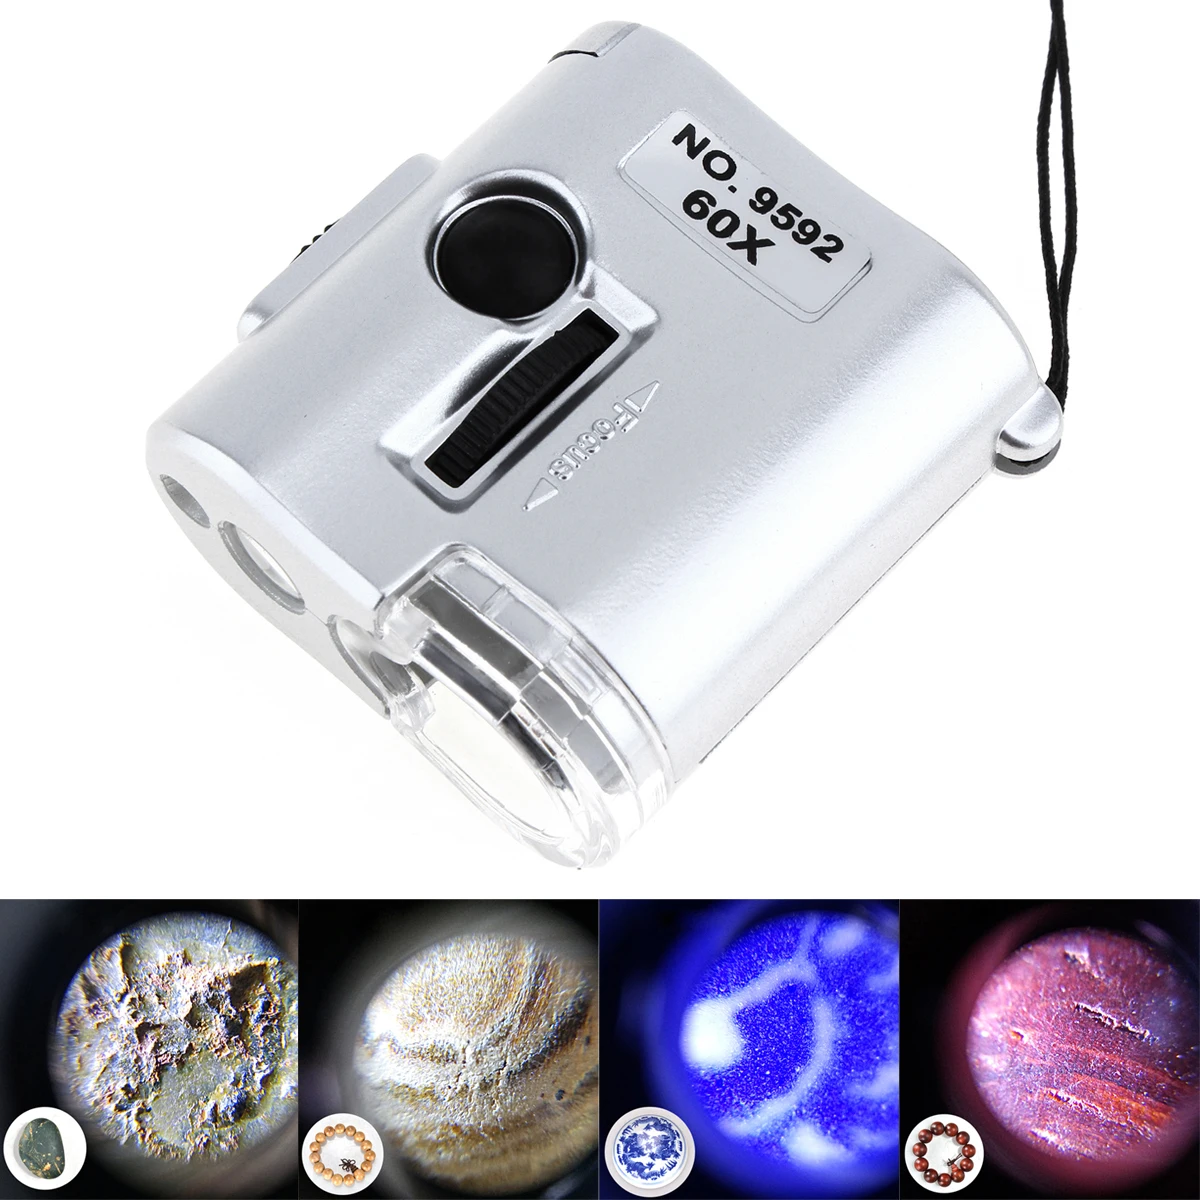 

Portable 60X Mini Portable Magnifier Pocket Magnifying Glass Microscope Jewelry Loupe Optical Lens Tool with LED UV Light